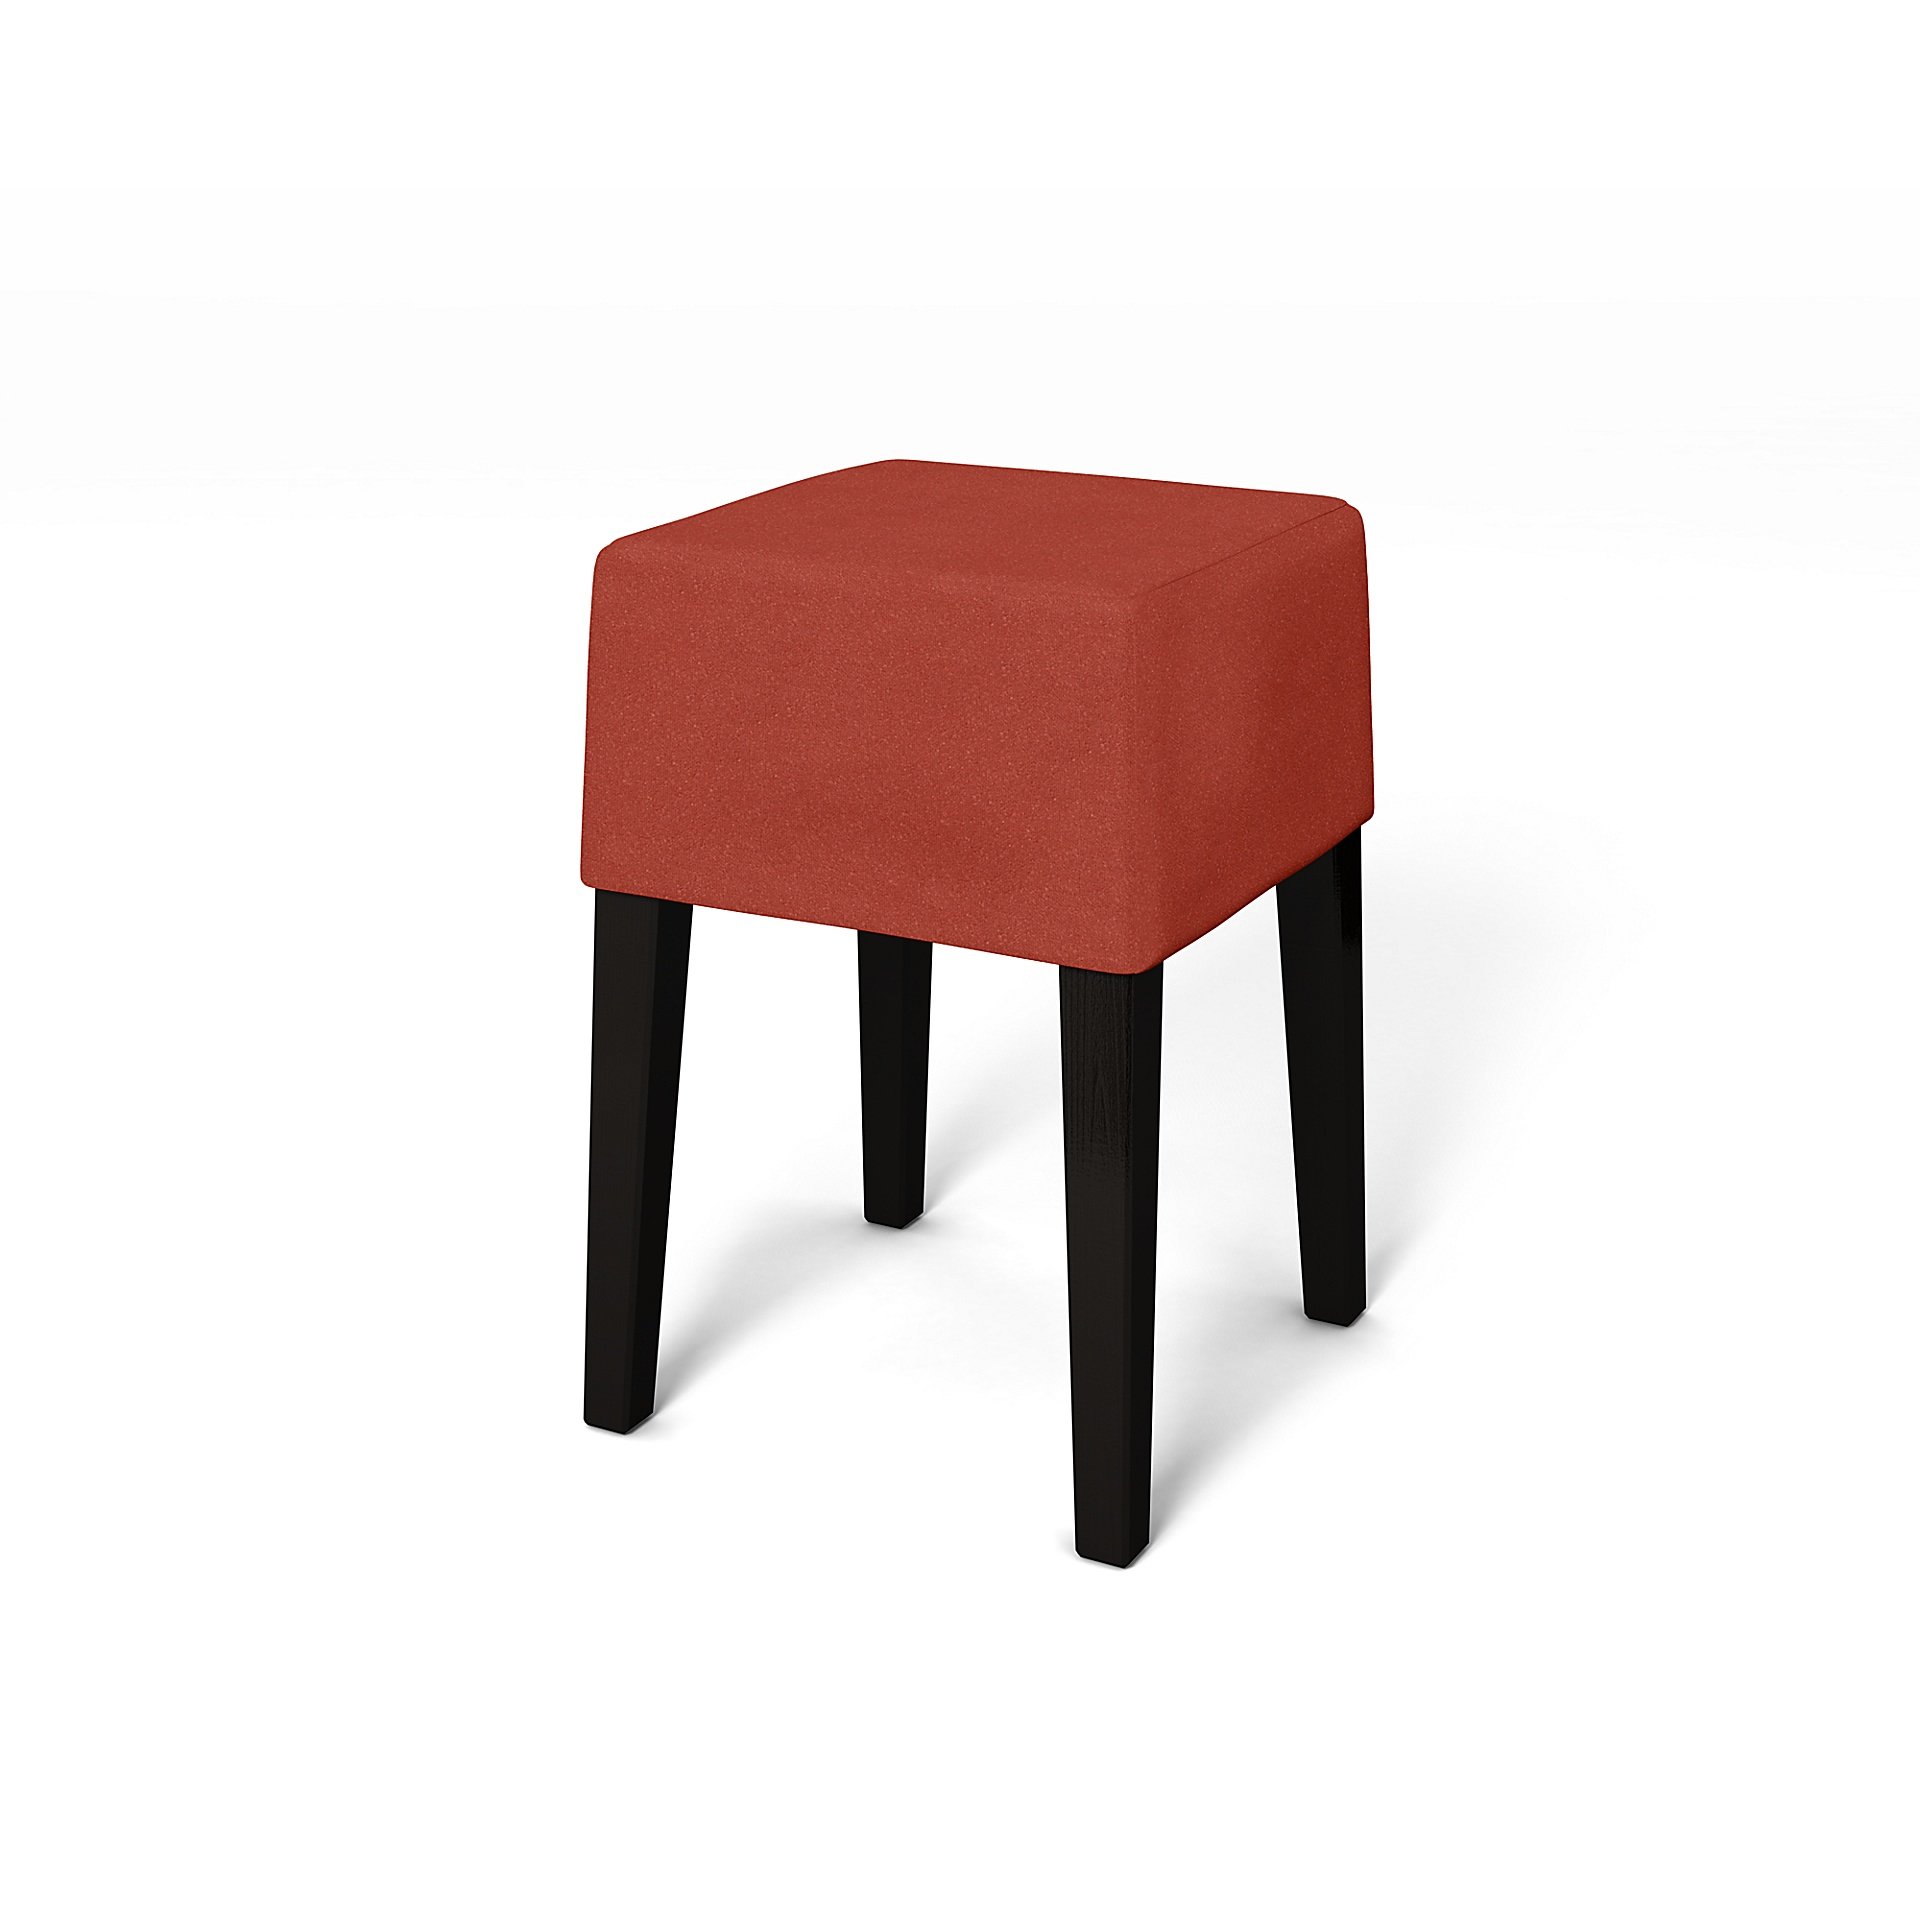 IKEA - Nils Stool Cover, Coral Red, Outdoor - Bemz